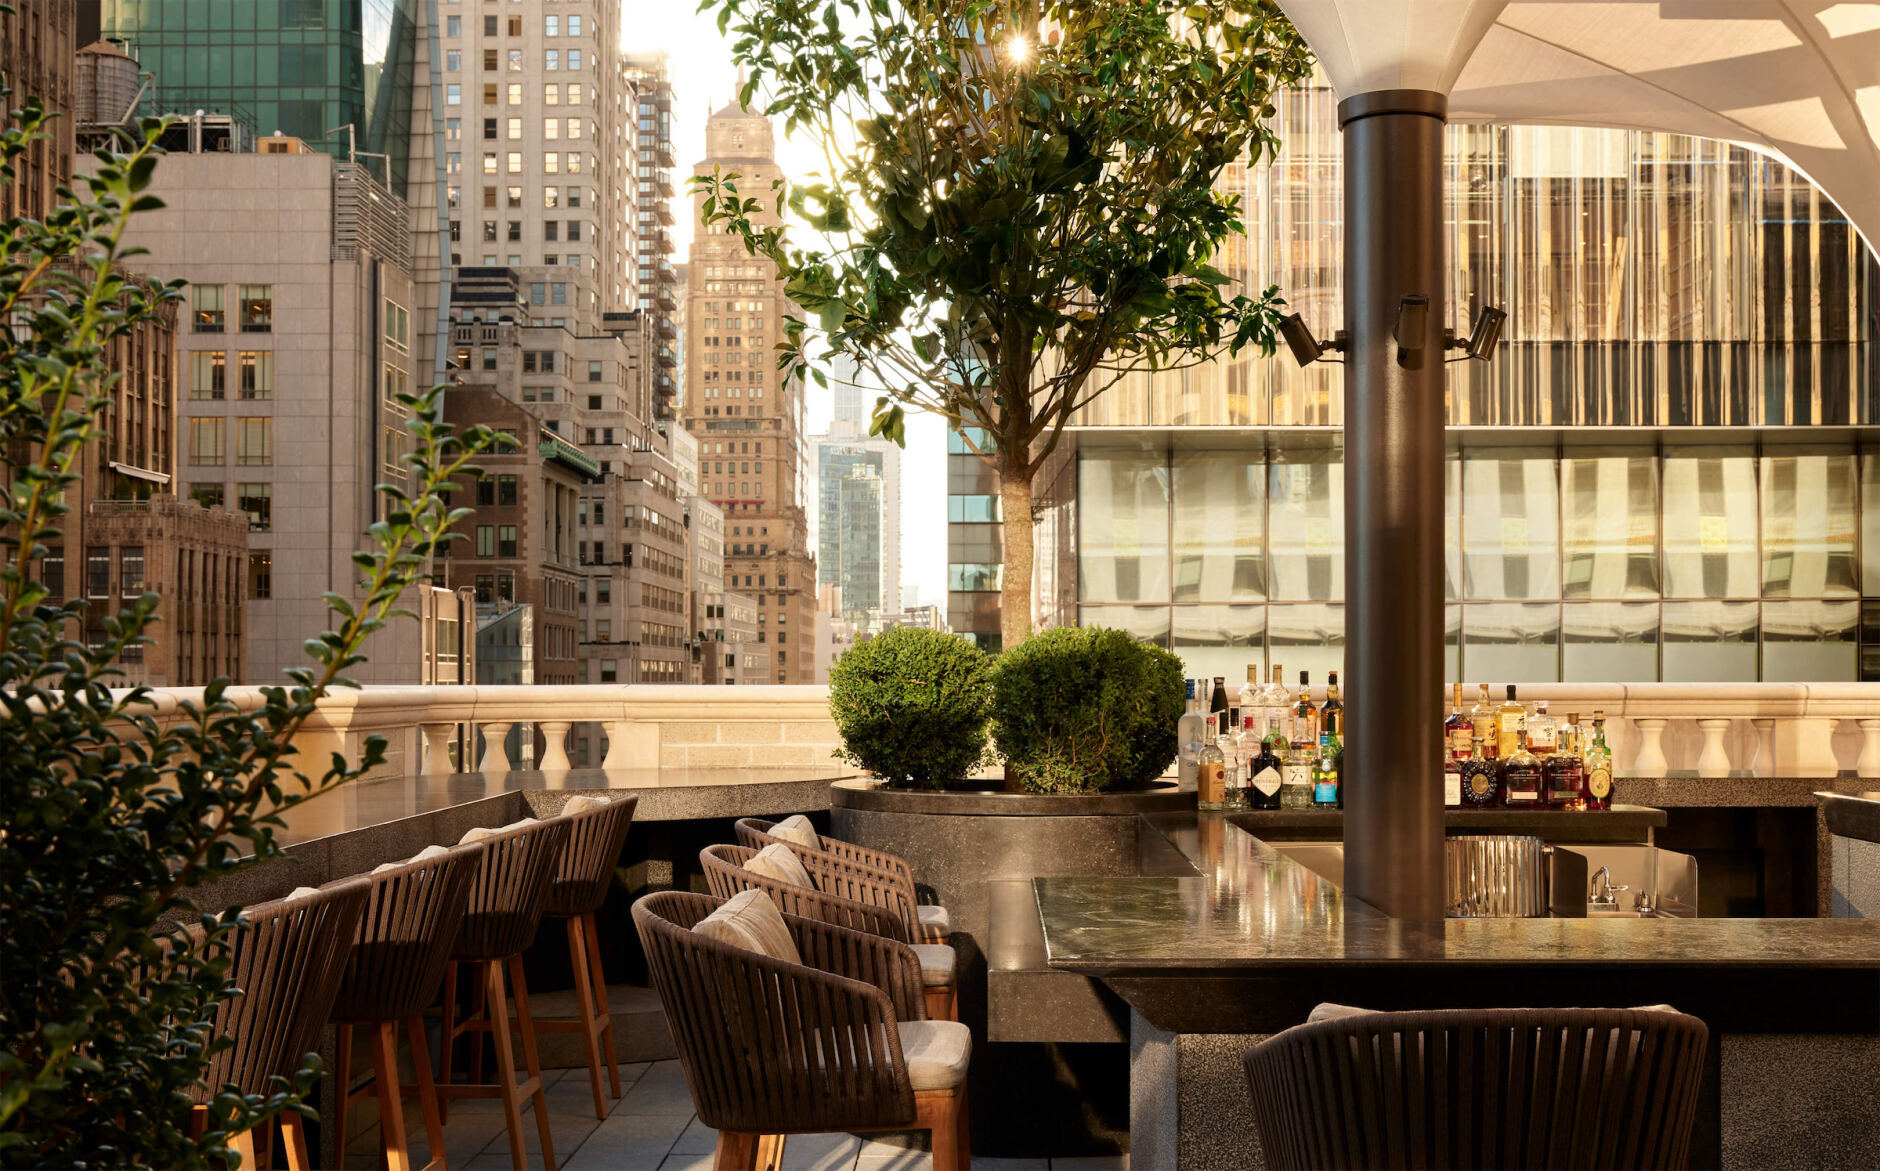 ROH New Hotel Openings: The garden terrace bar at Aman New York